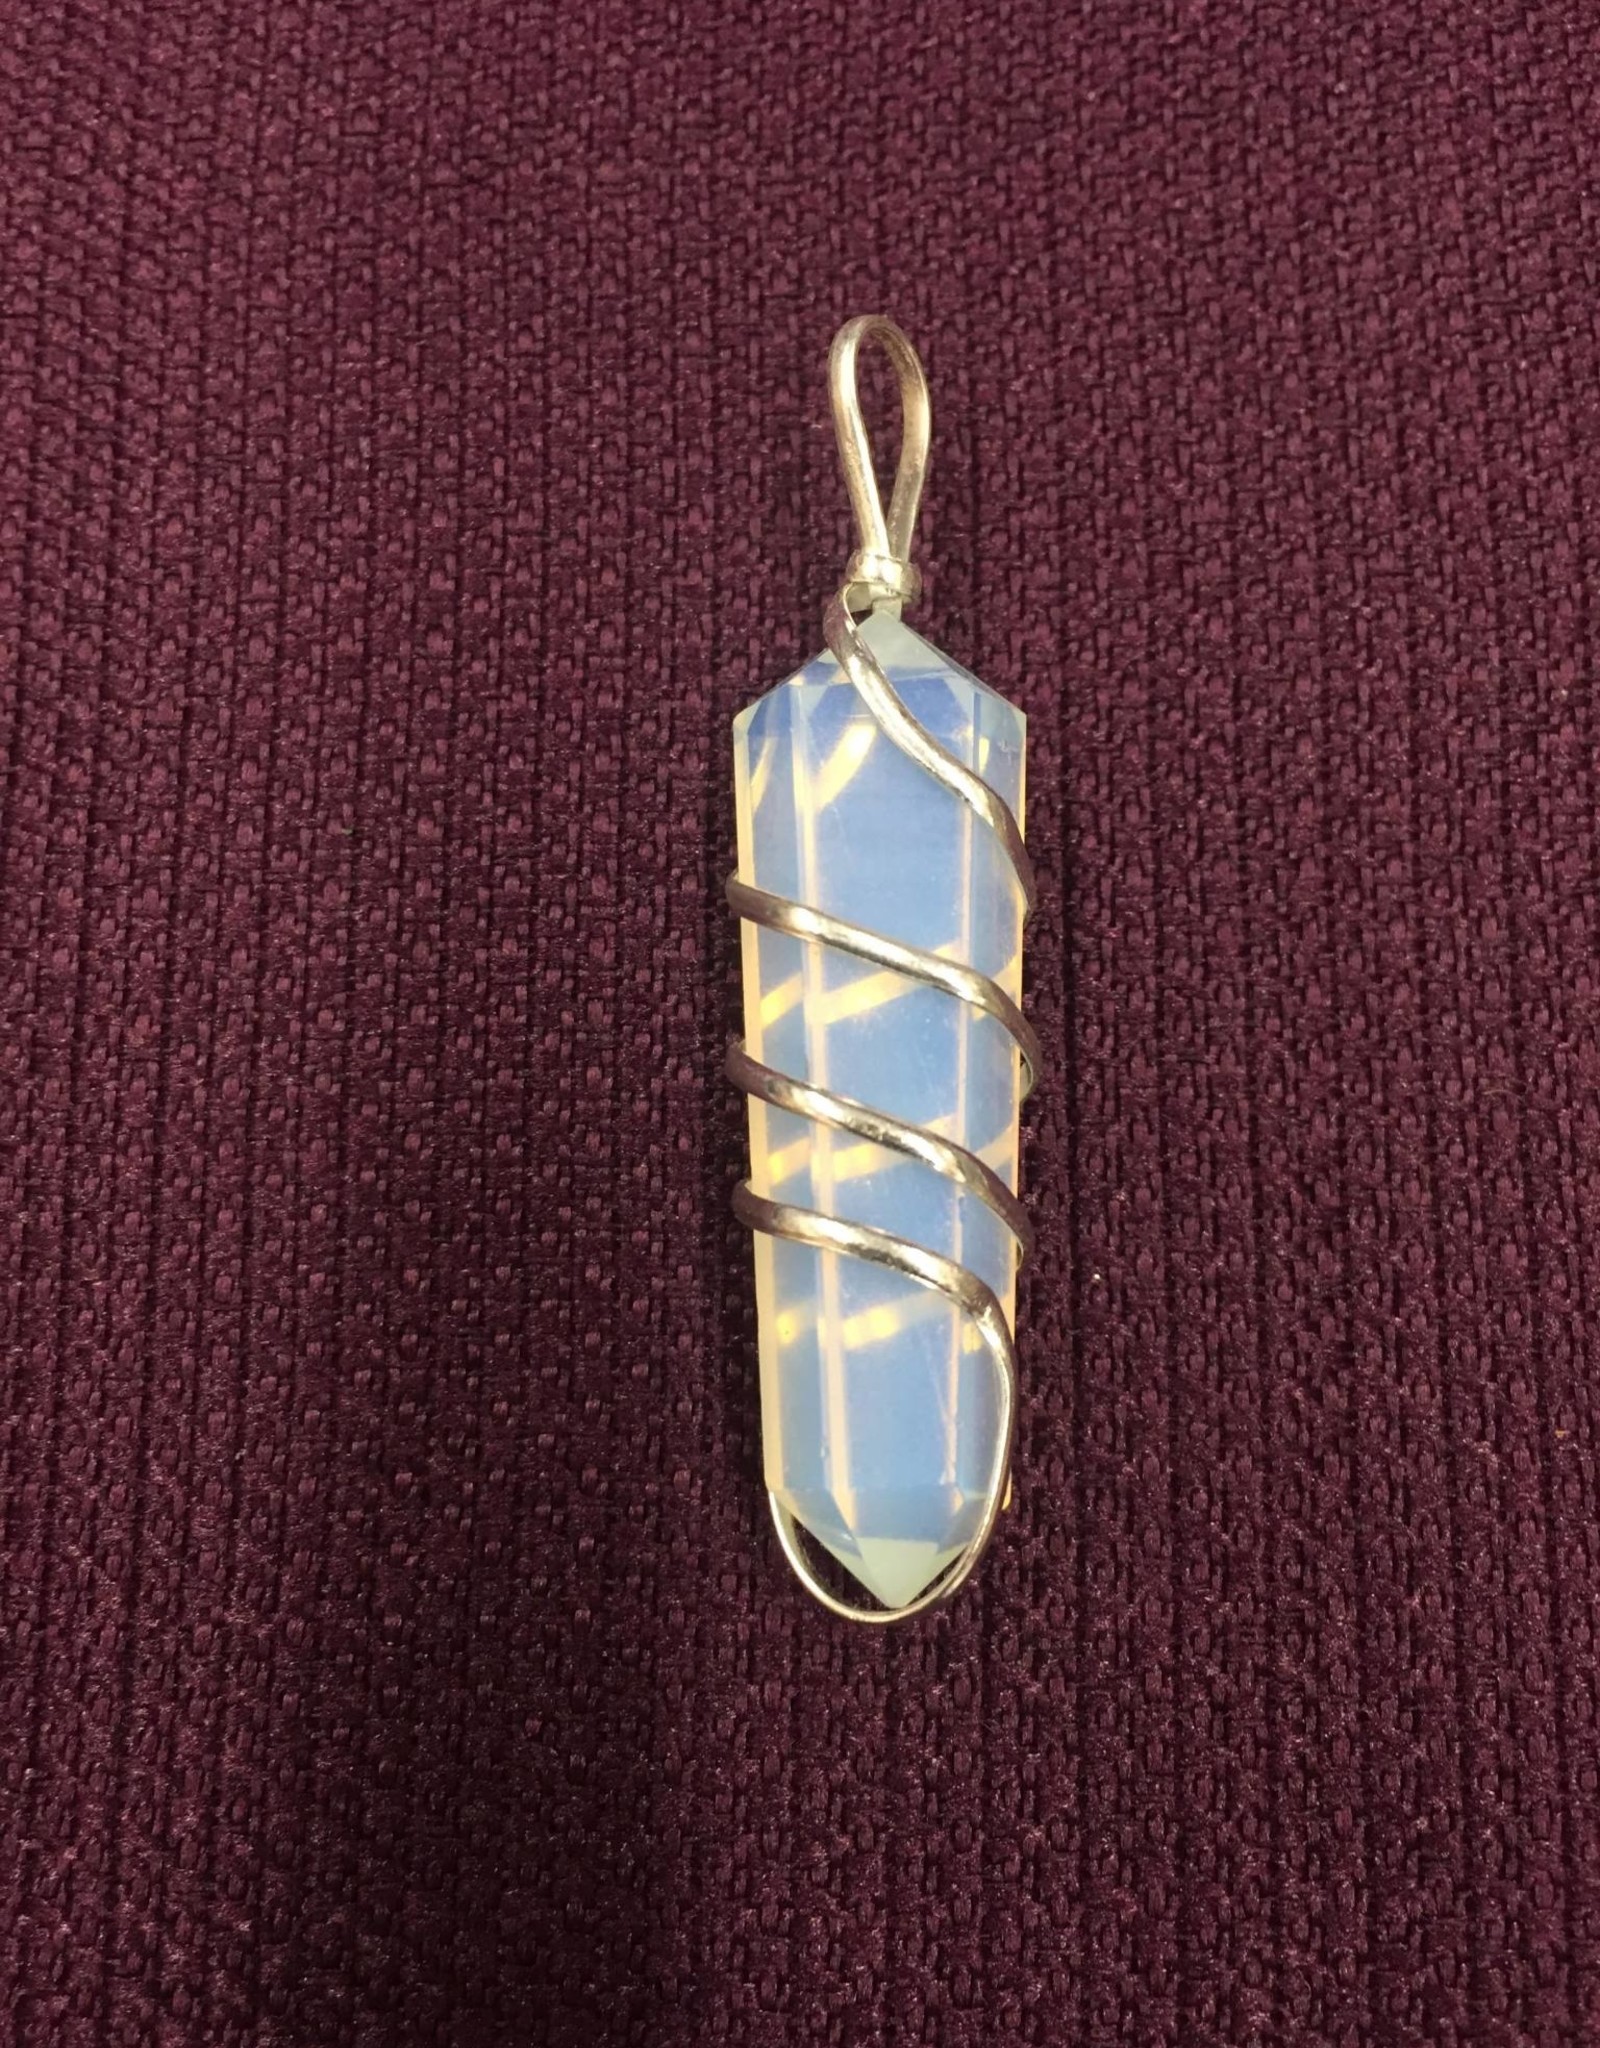 Opalite Spiral Wrapped Pendant